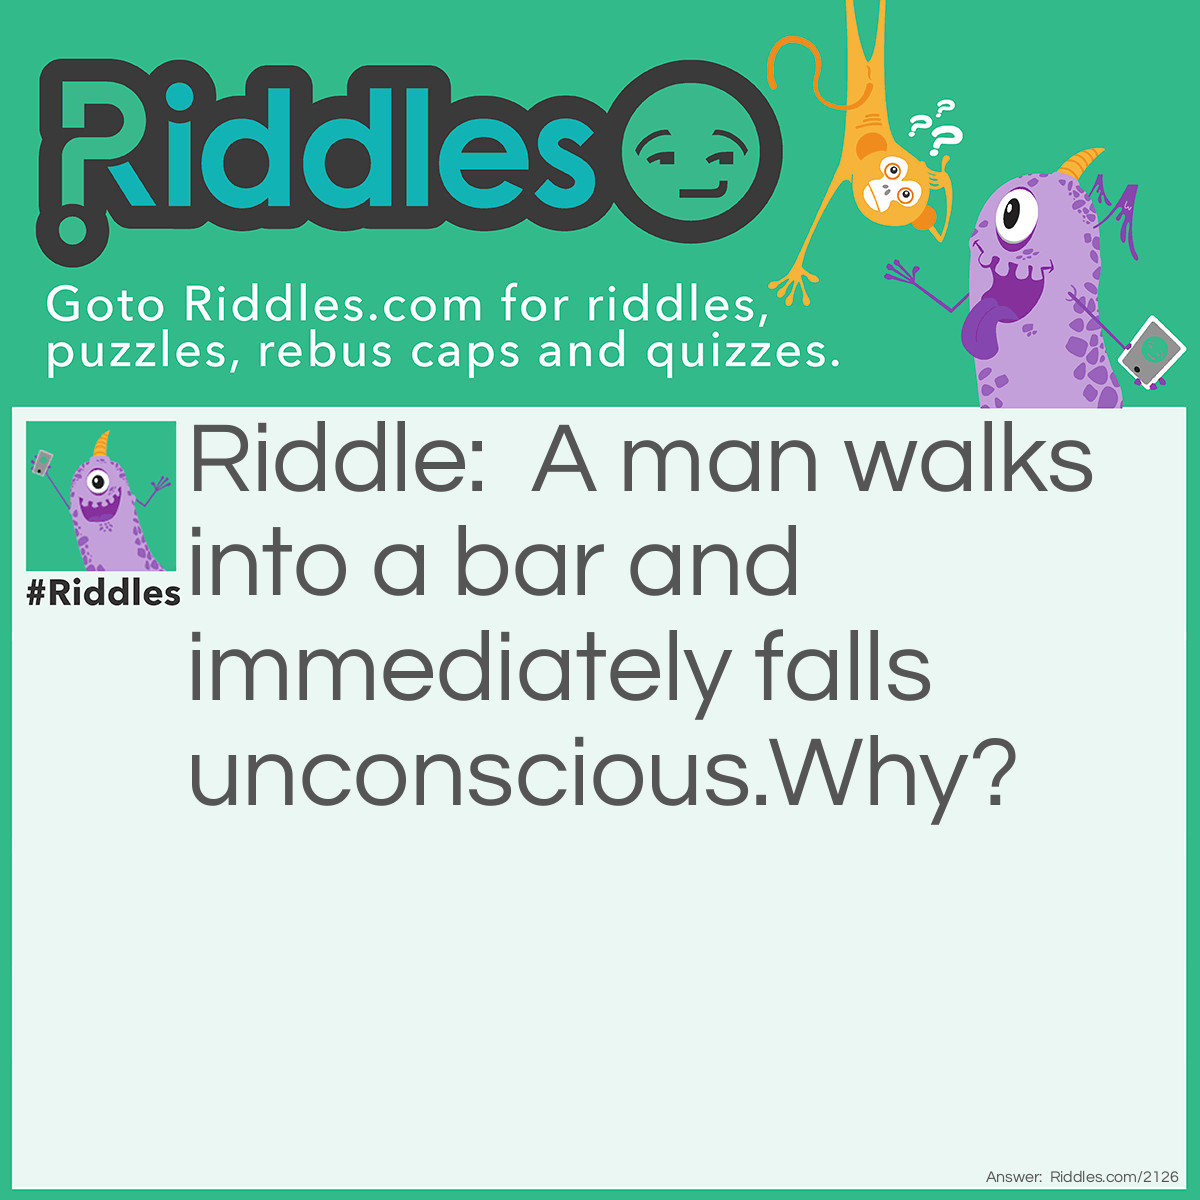 Riddle: A man walks into a bar and immediately falls unconscious.
Why? Answer: It was an iron bar!